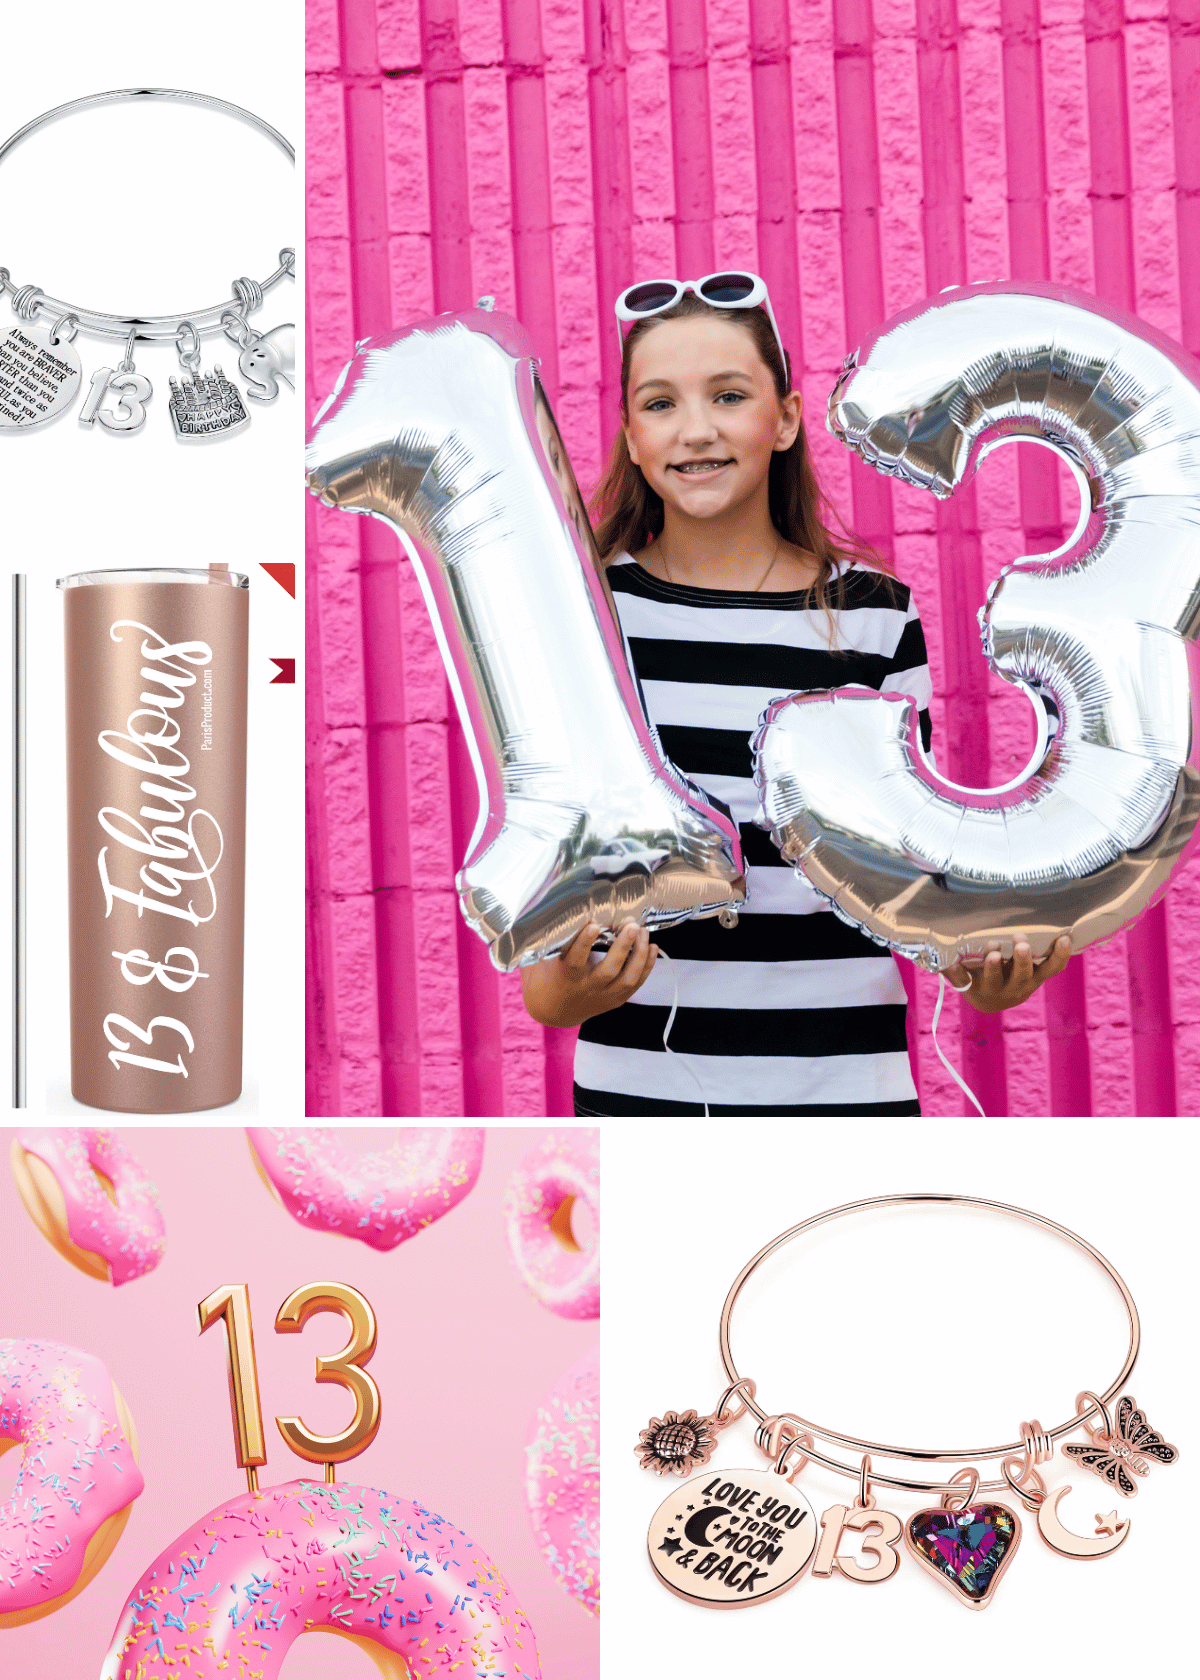 The Best Birthday Gifts For 13-Year-Old Girls